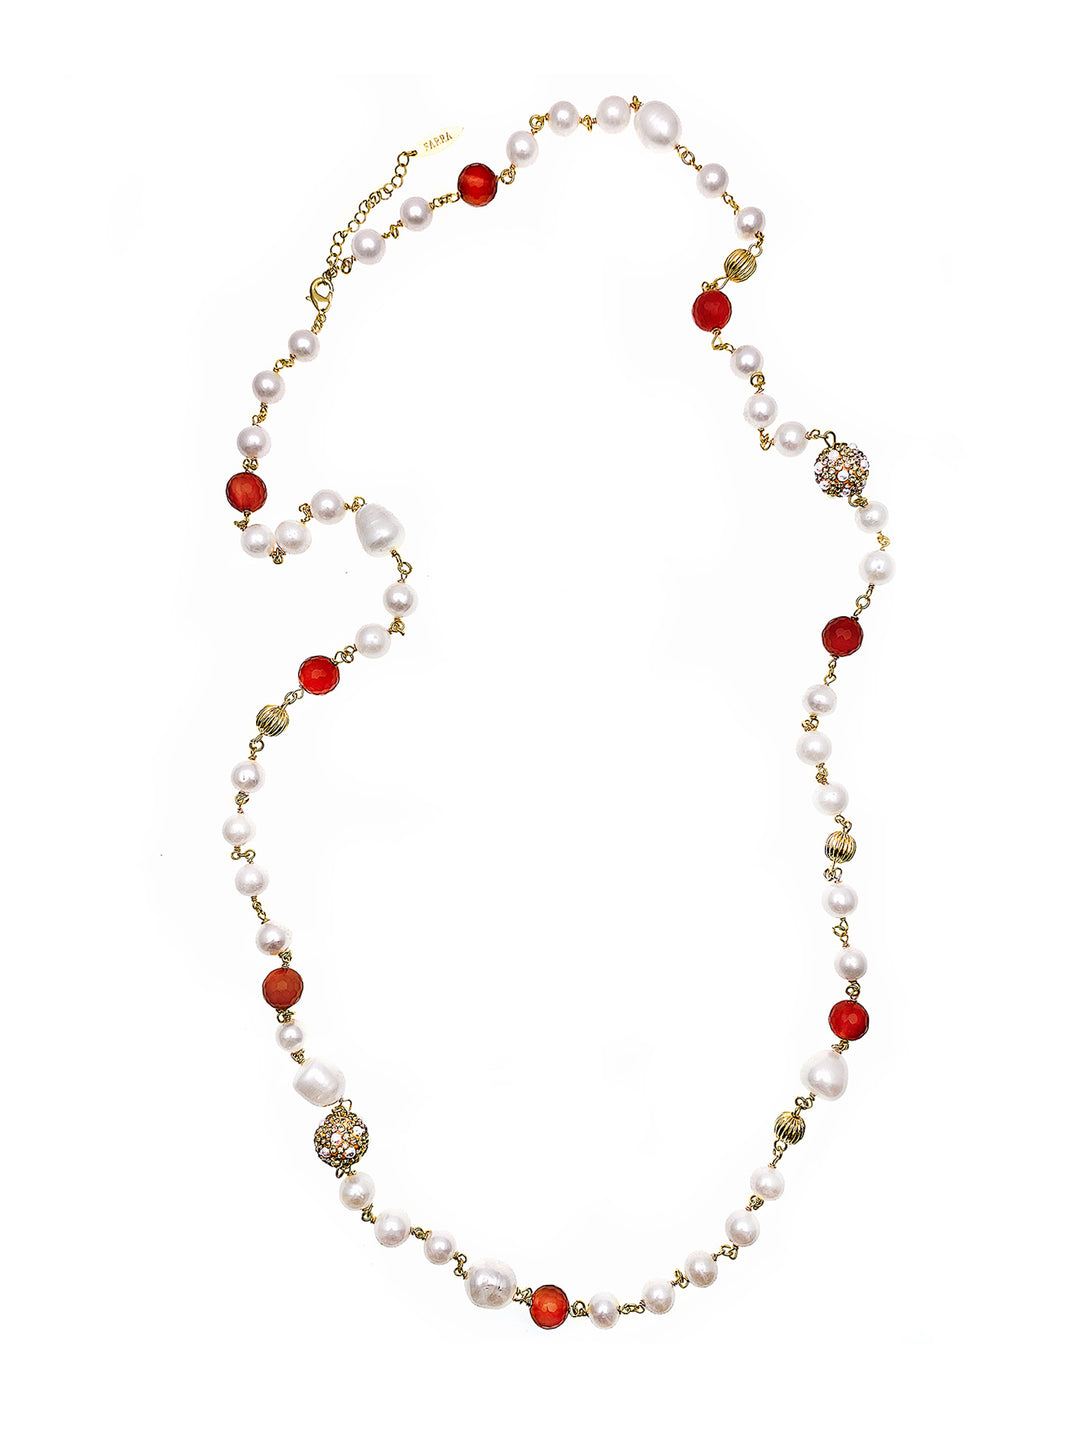 Freshwater Pearls with  Red Agate Chain Necklace FN007 - FARRA